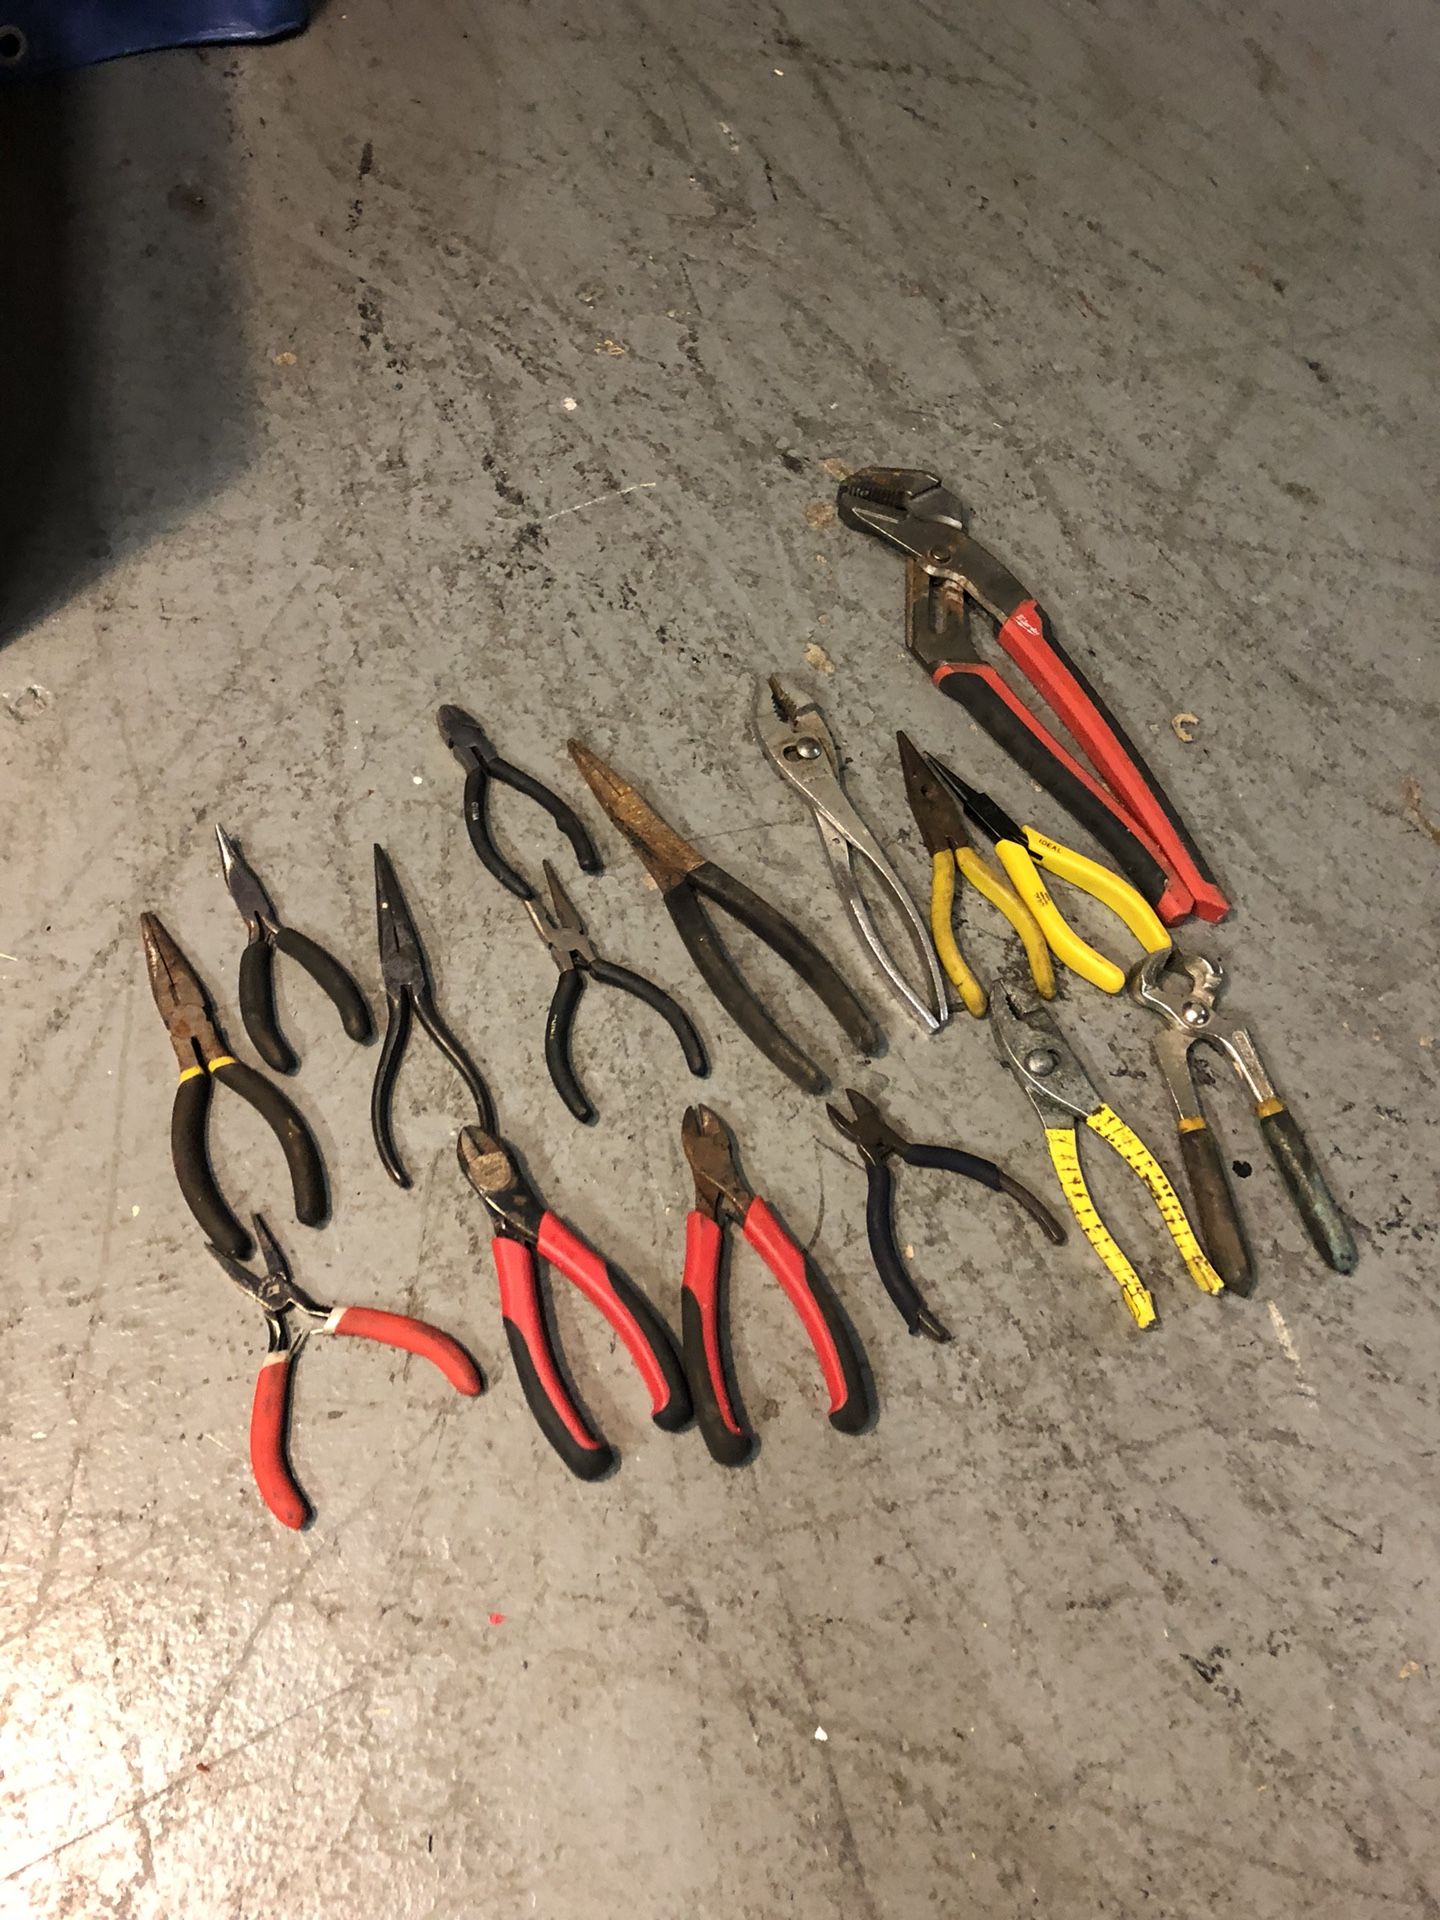 Assorted pliers and wrench